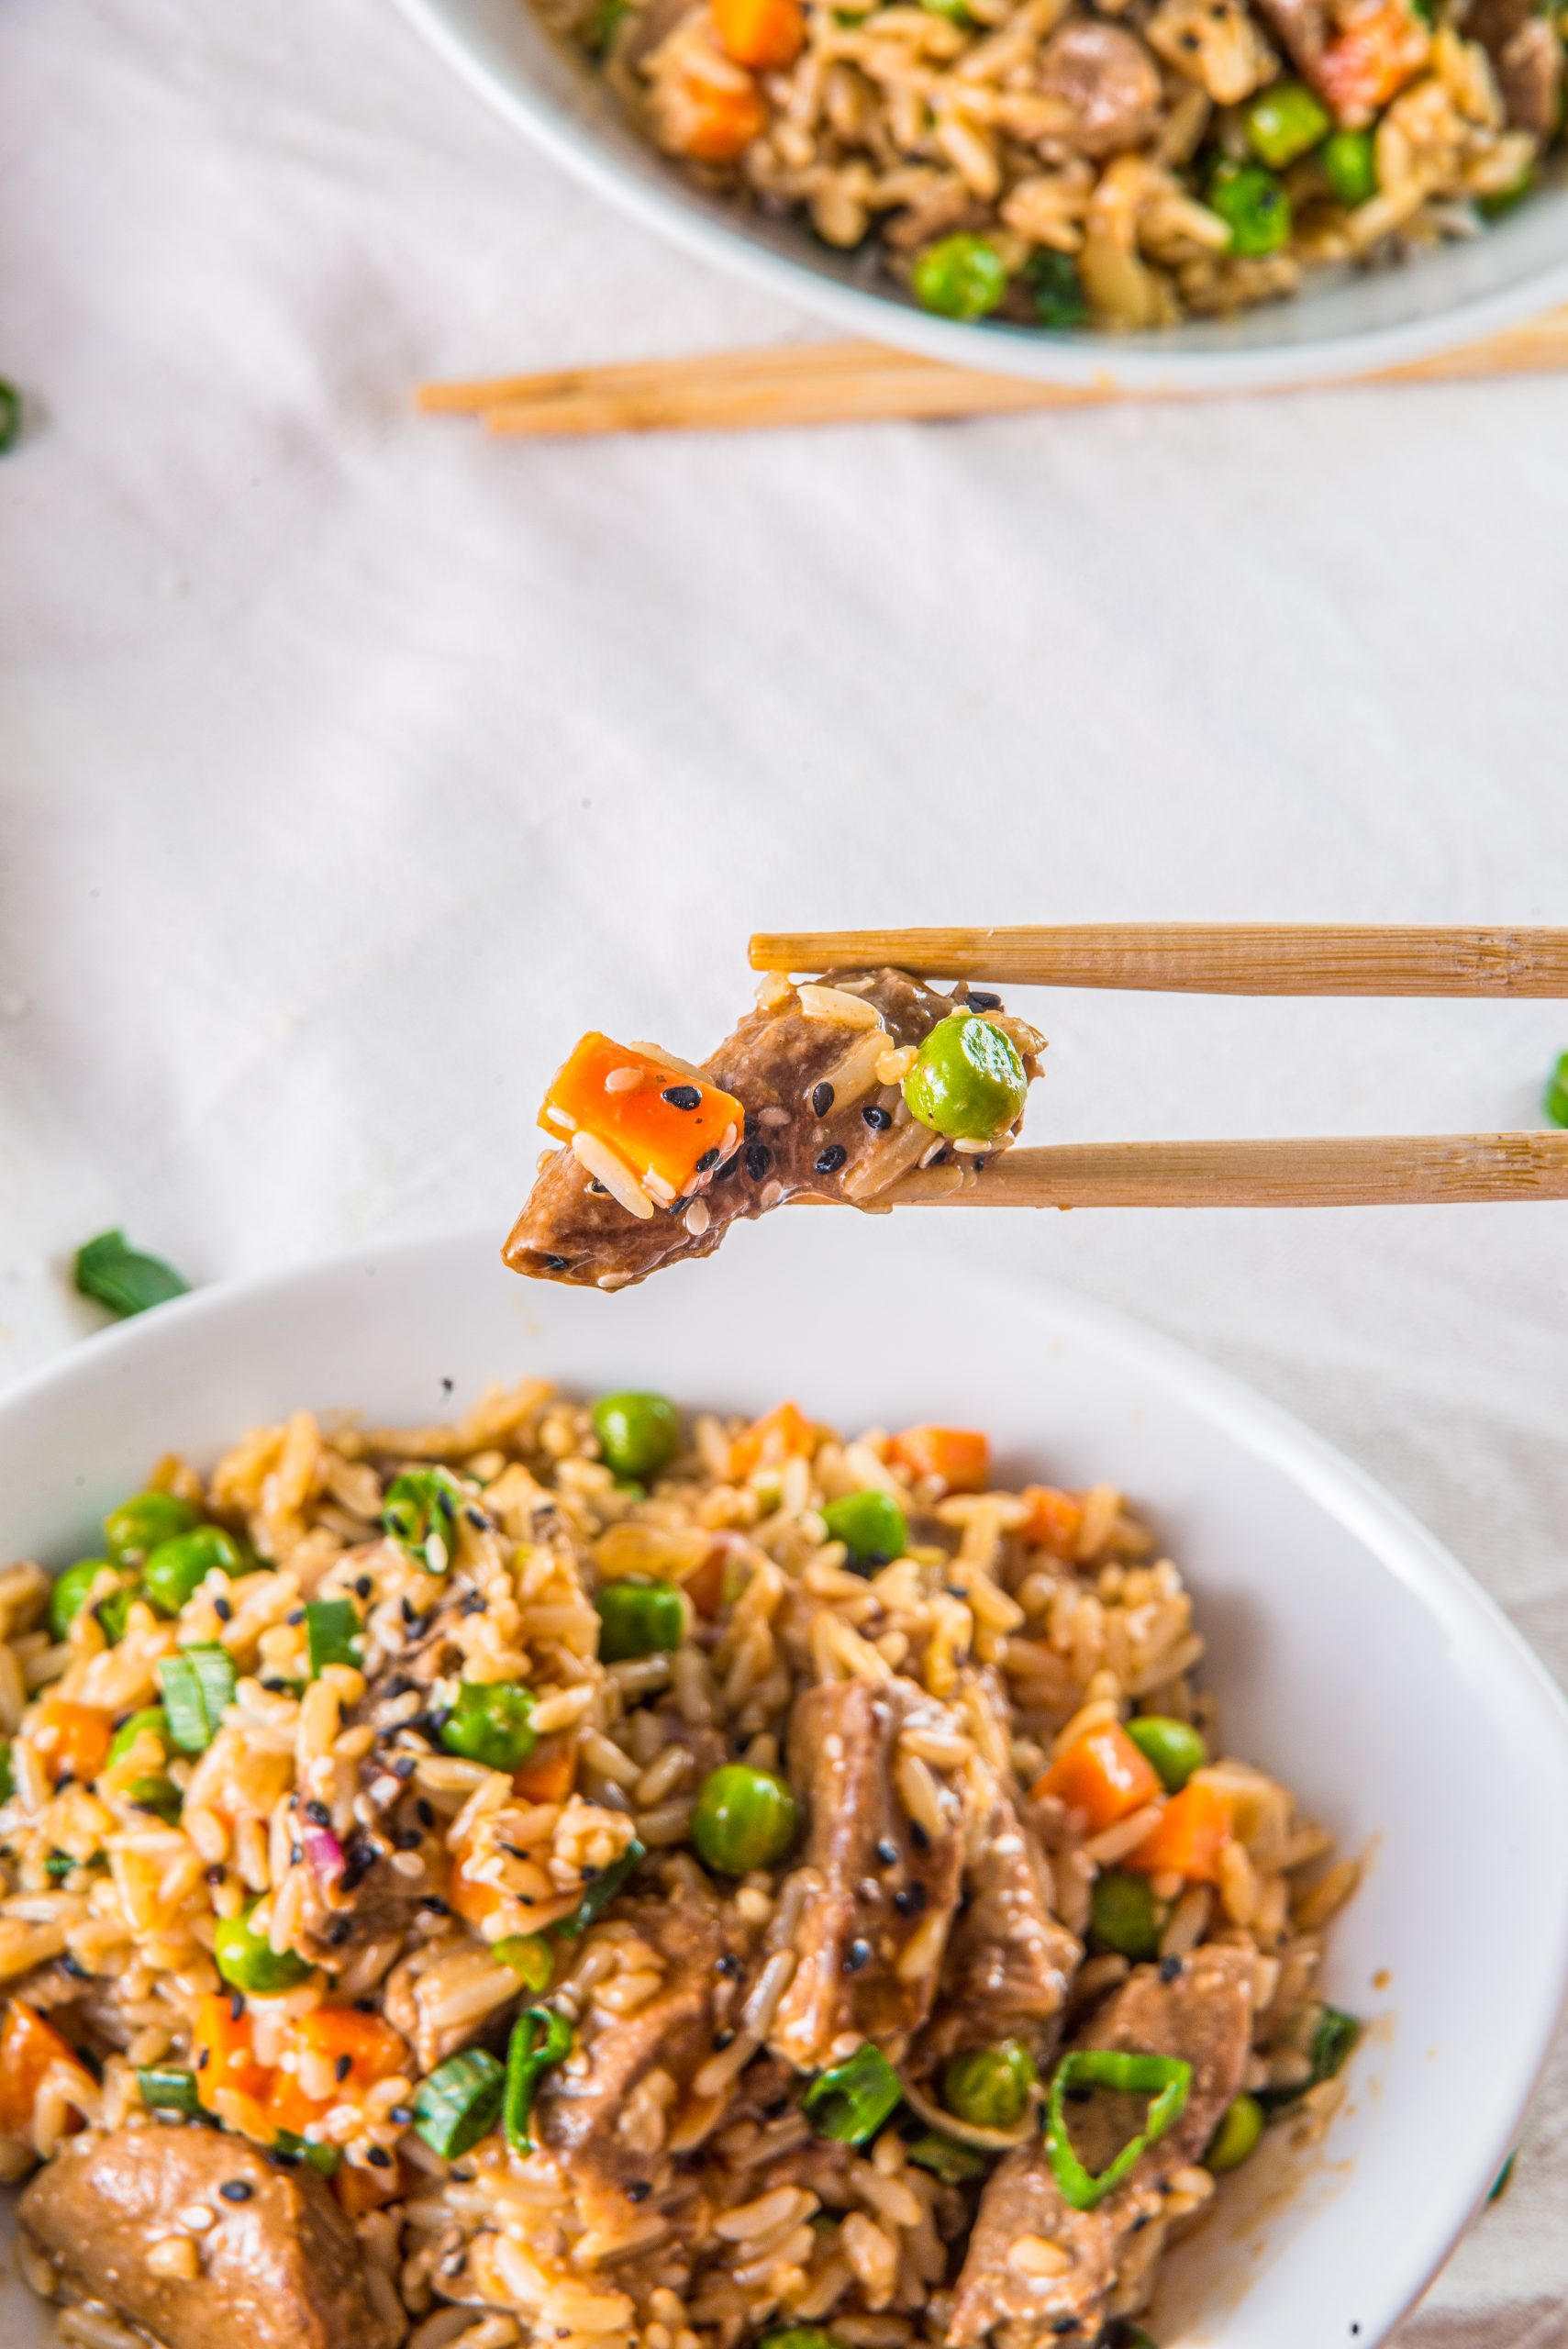 Steak-fried-rice-in-a-bowl-with-chopsticks